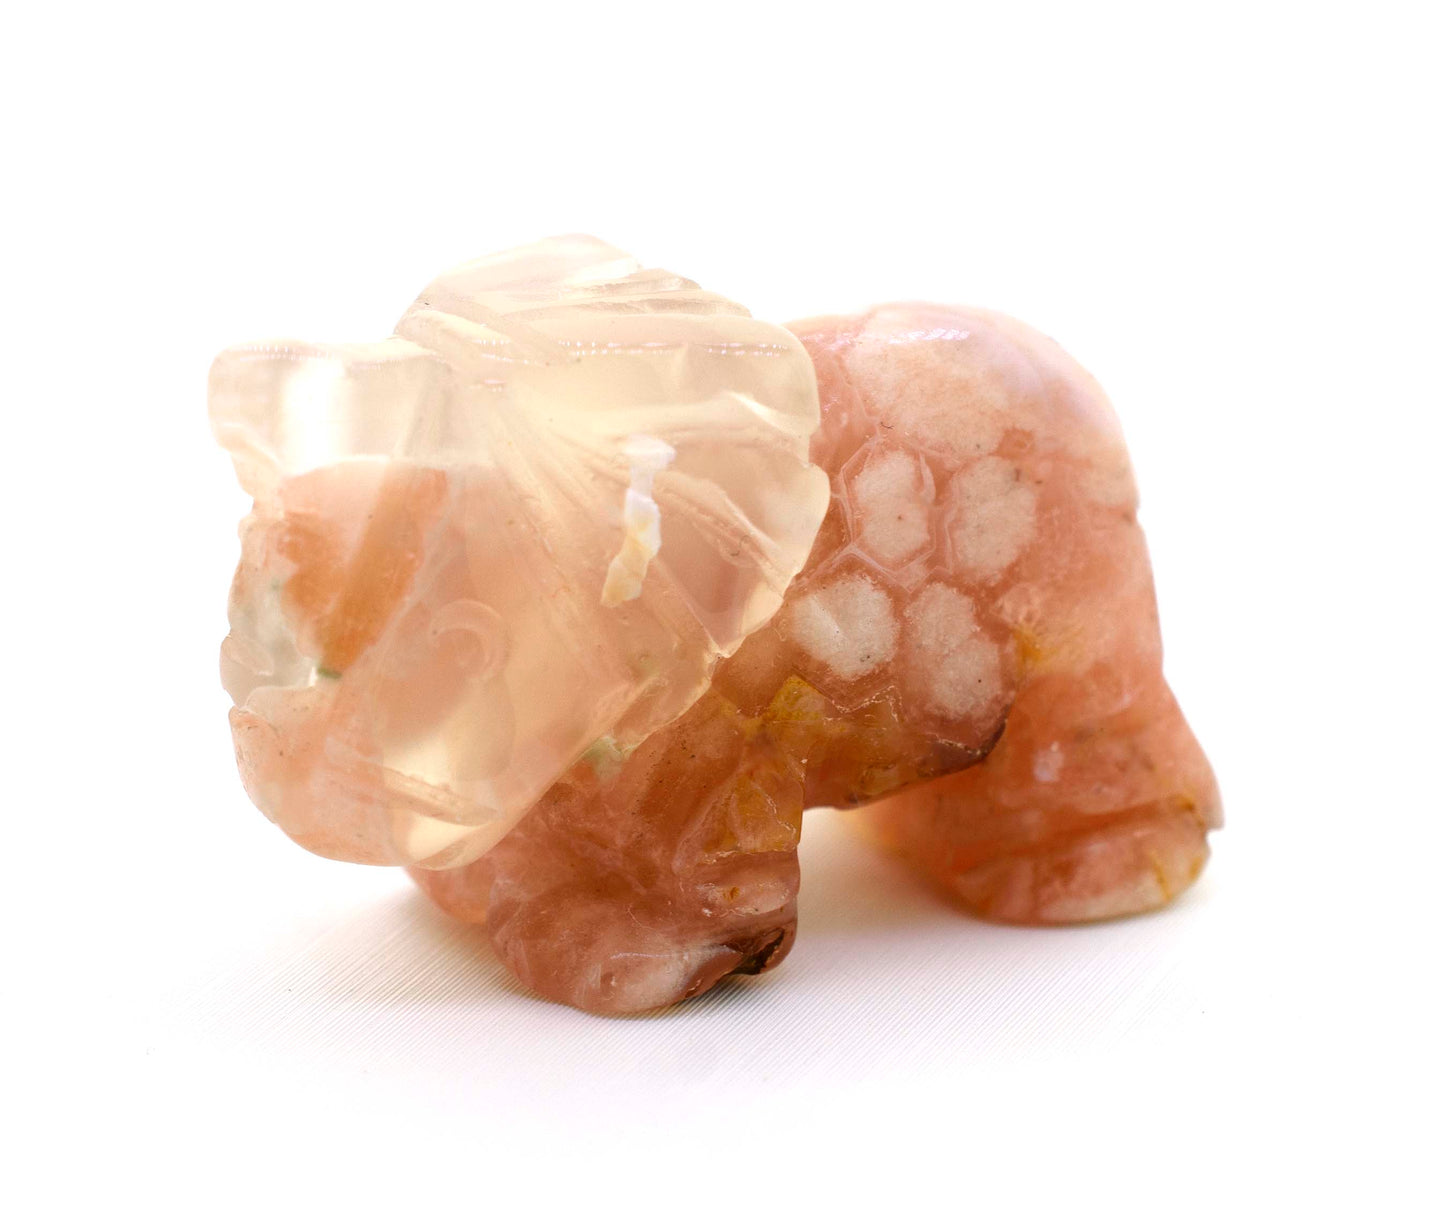 Elephant Carved Gemstone Figures on a white surface.